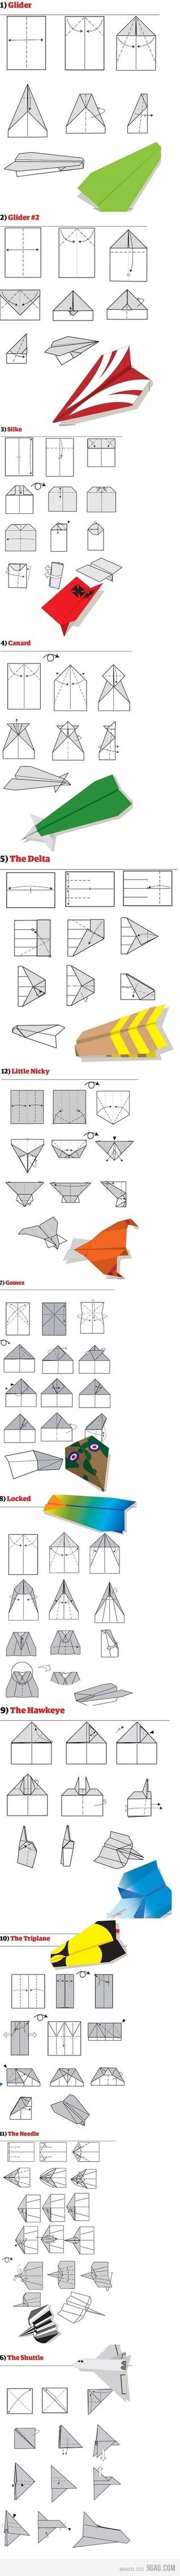 Paper airplanes patterns